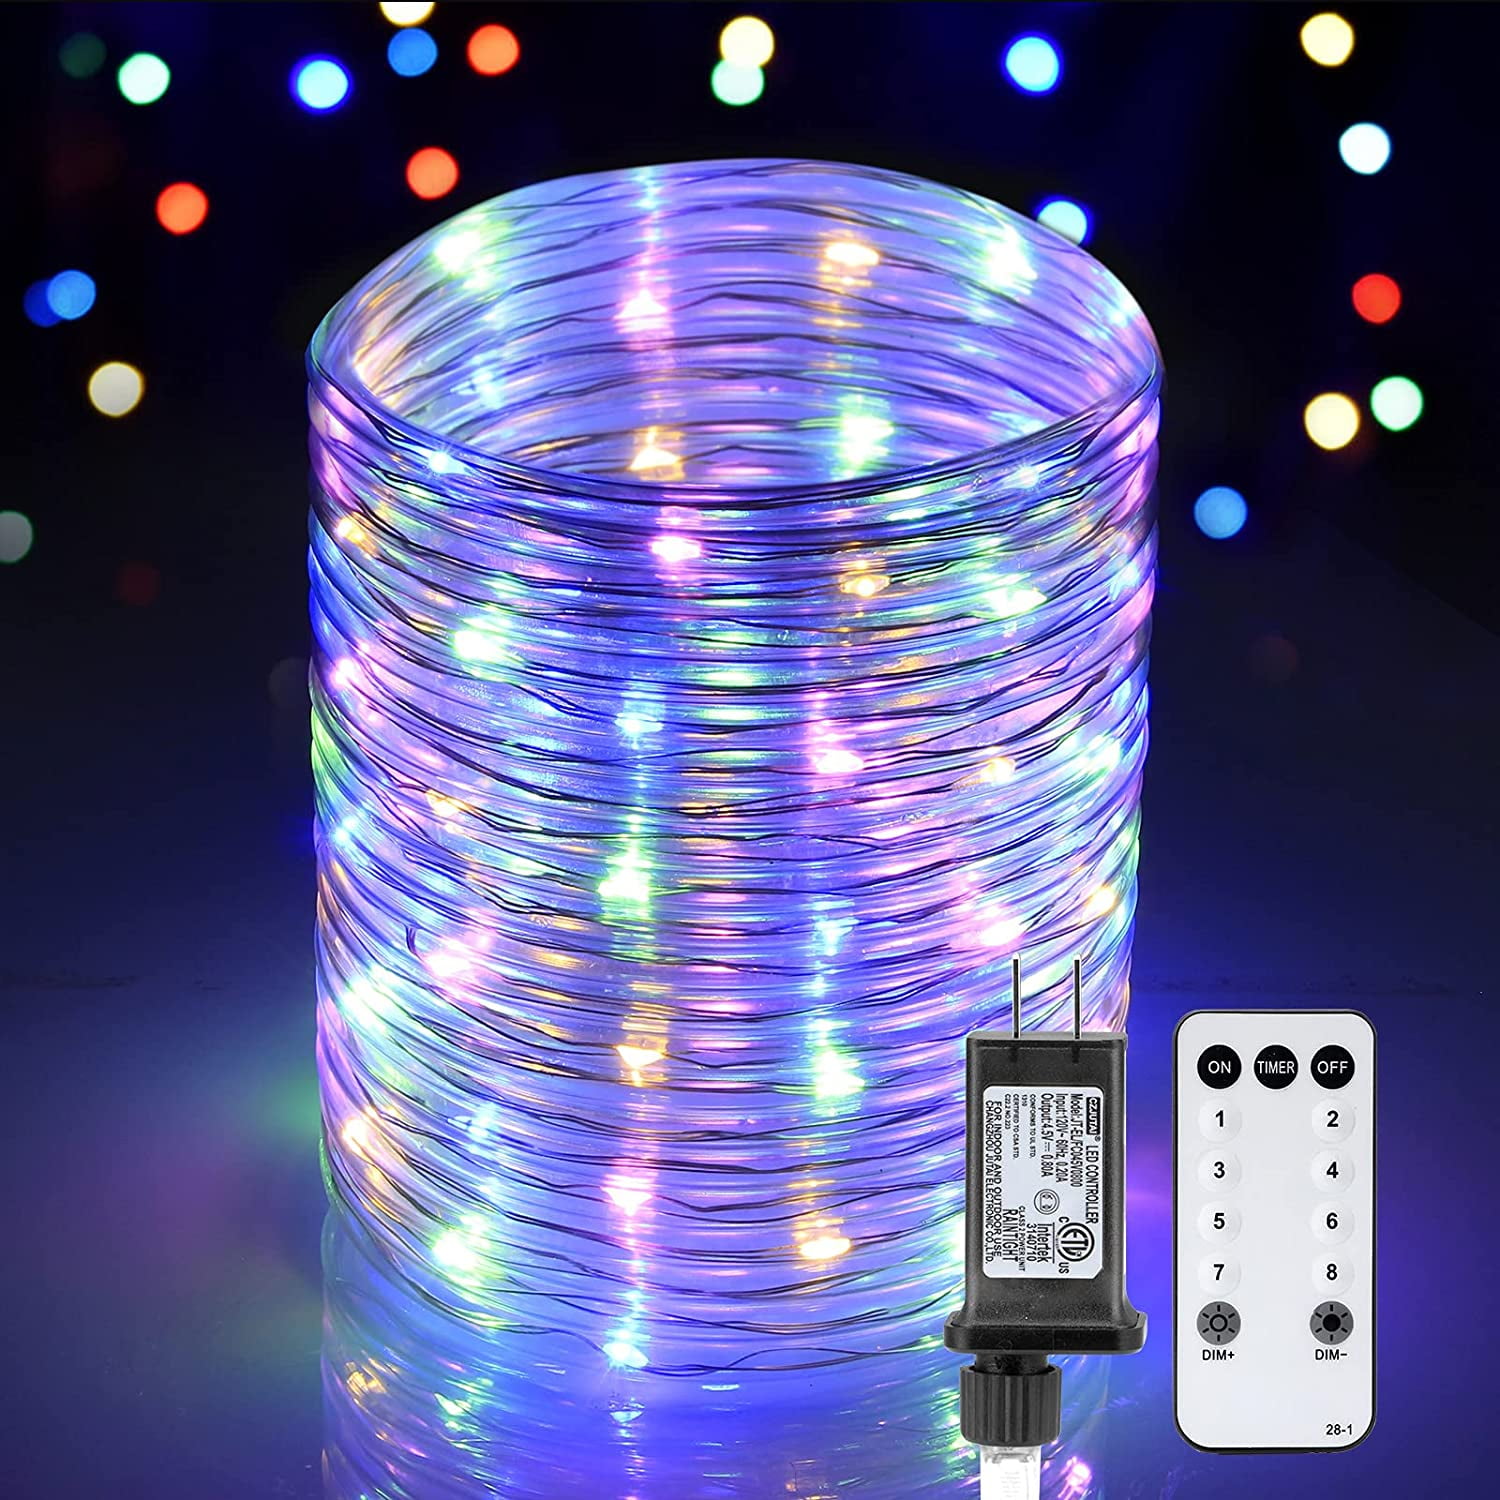 Ollny Outdoor Rope Lights Plug in,120 Led Lights Strip Tube Lights,Color Fairy 